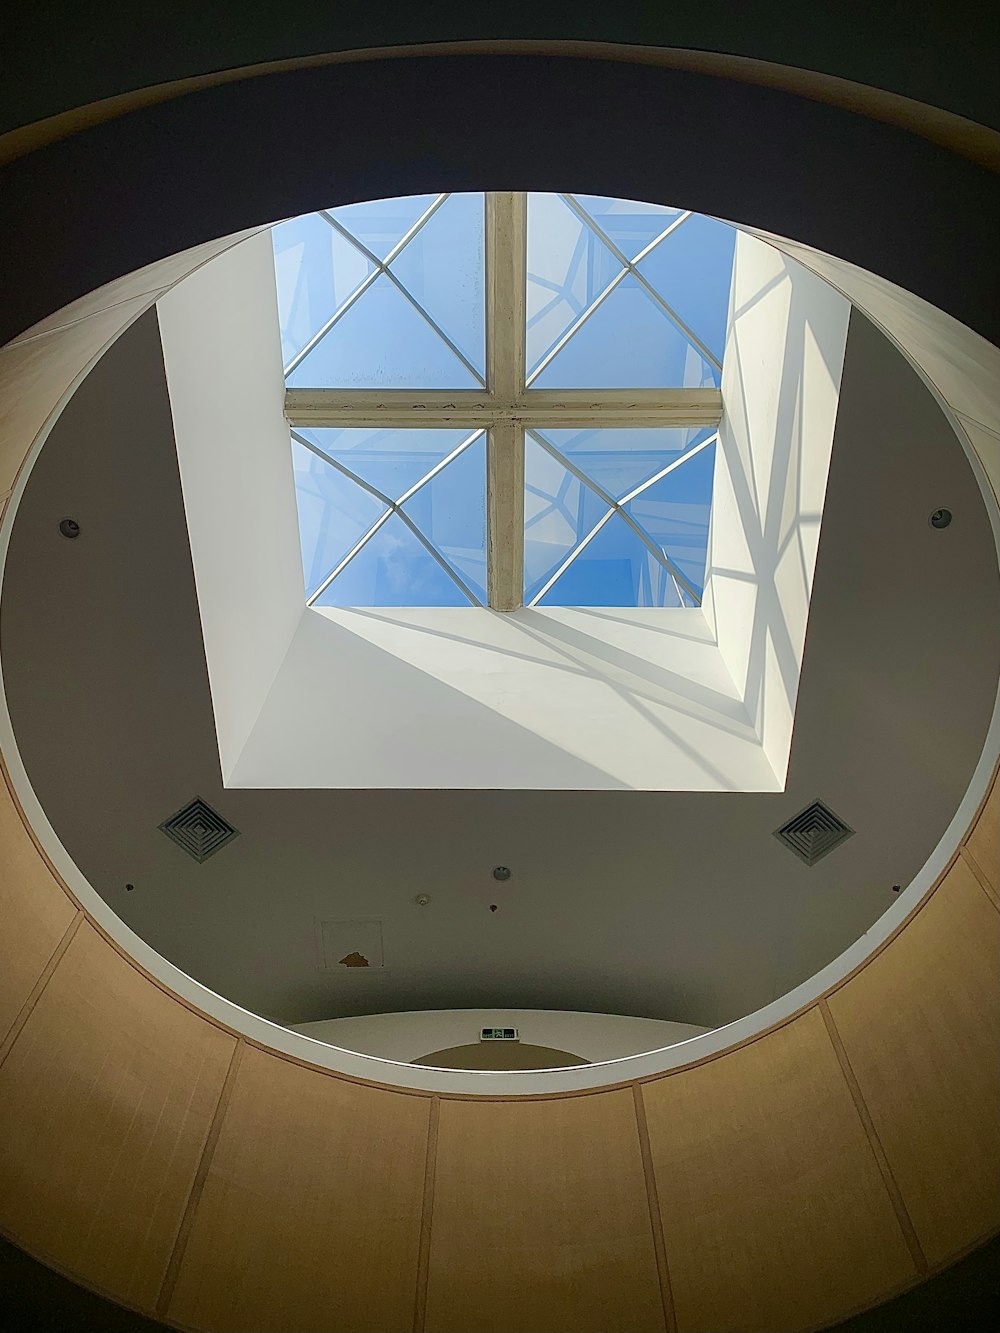 a view of a round window in a building